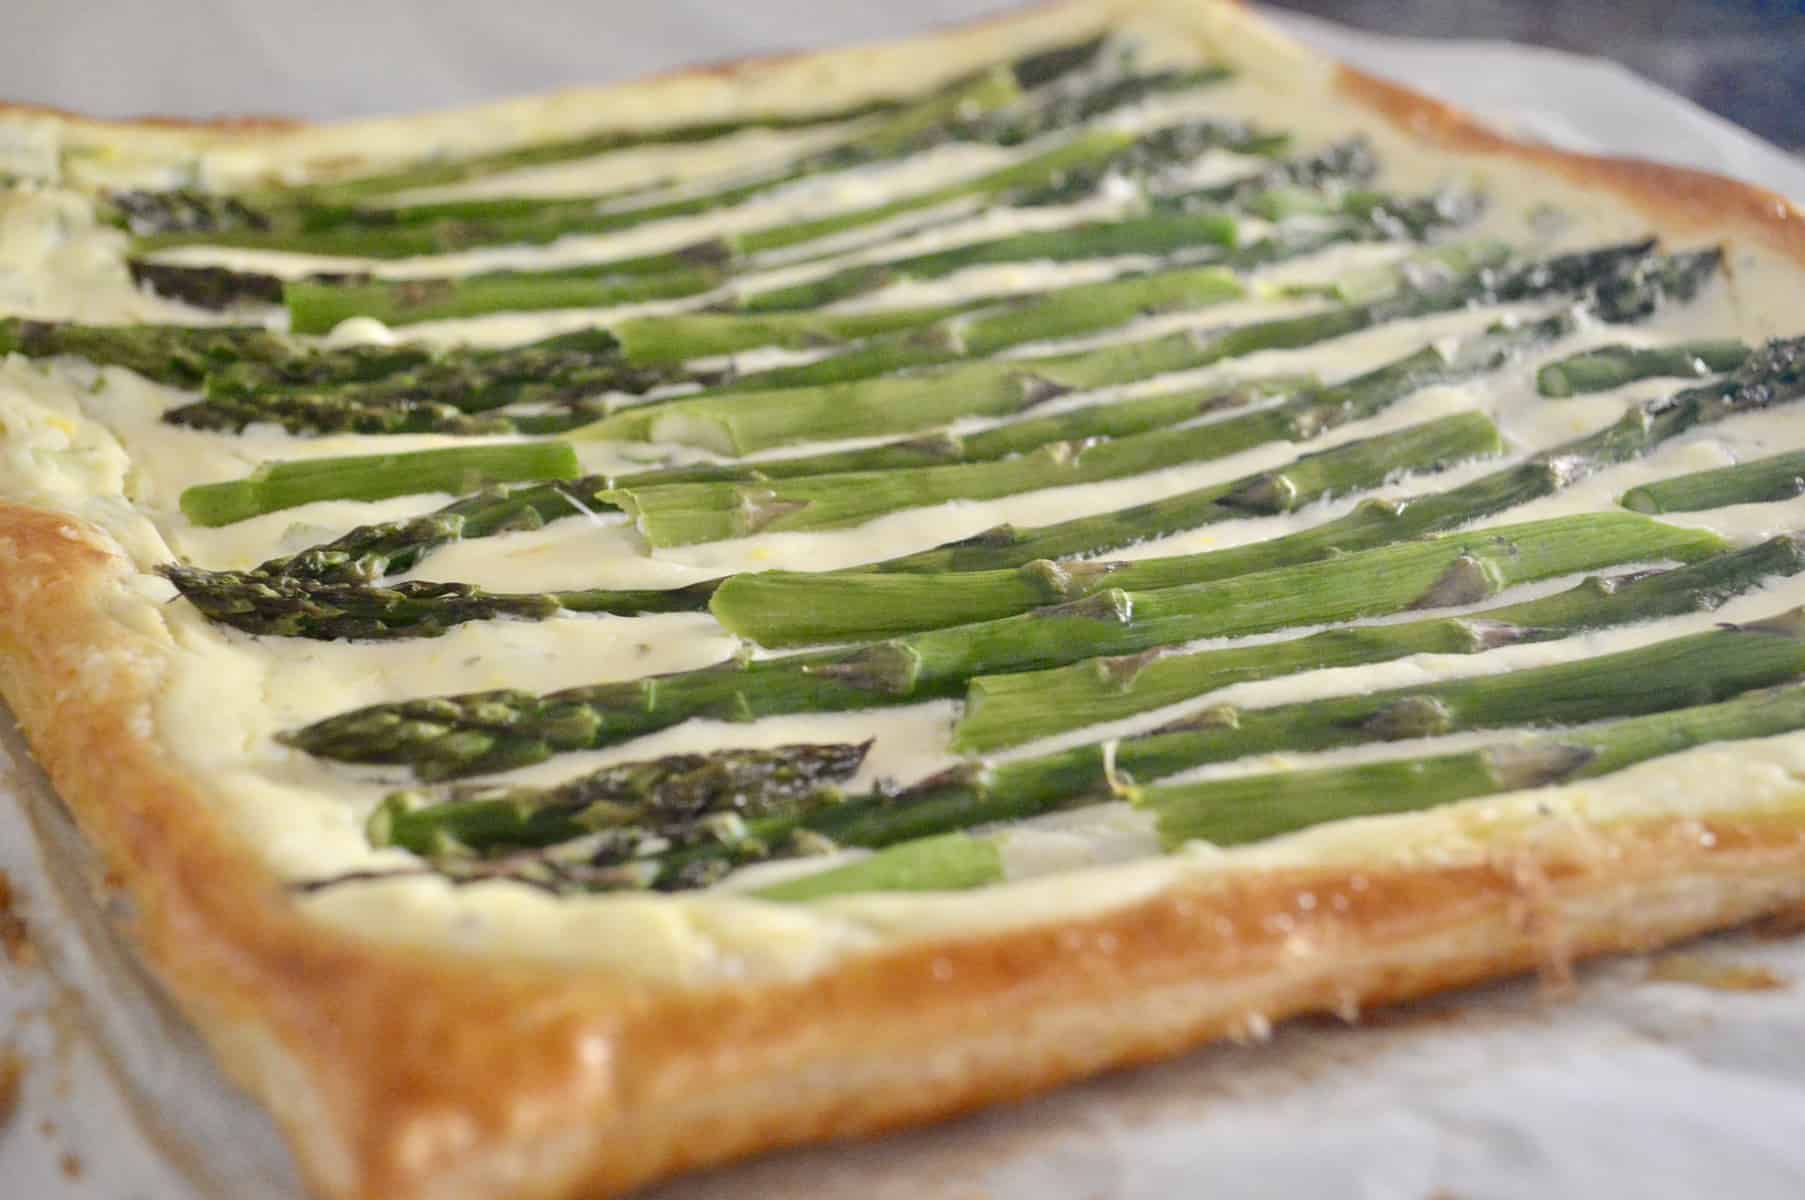 Asparagus Tart with Ricotta and Lemon is made with puff pastry and is an easy recipe for an appetizer or side dish. Great party food for baby or bridal showers, or served on the holidays. #asparagus #tart #ricotta #puffpastry #thanksgivingsidedish #christmassidedish #easter #appetizer #partyfood #appetizerforparty #easyrecipe #brunch #breakfast